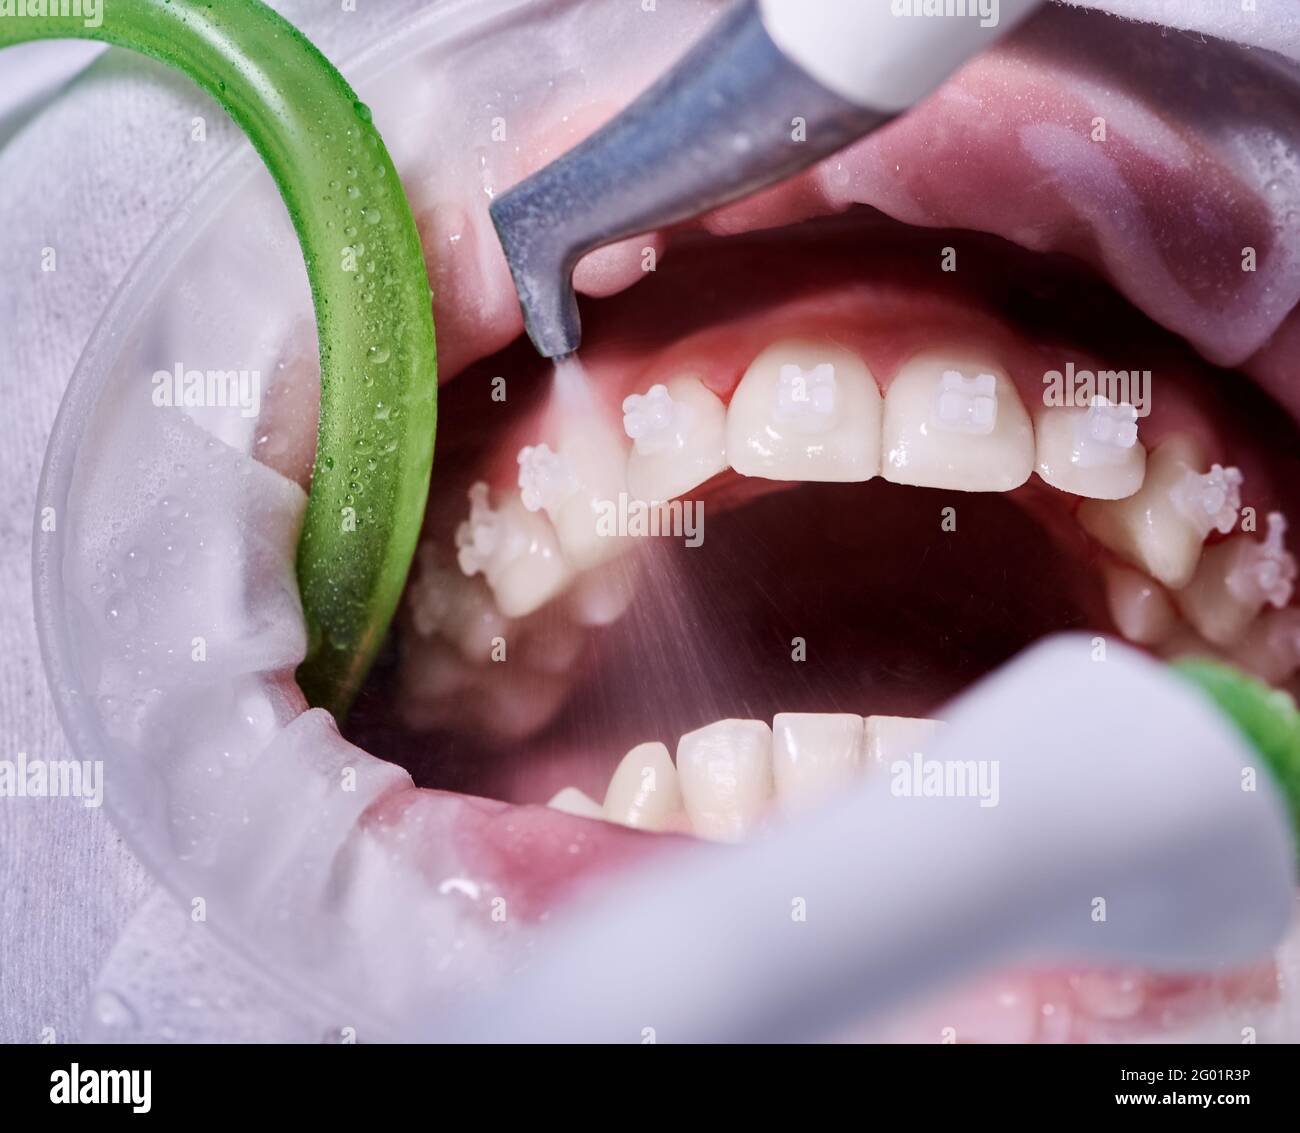 Macro photography. Top view on cleaning process in patient's mouth. Cleaning teeth with water jet and saliva ejector. Cheek retractor on the mouth. Concept of professional dental hygiene Stock Photo